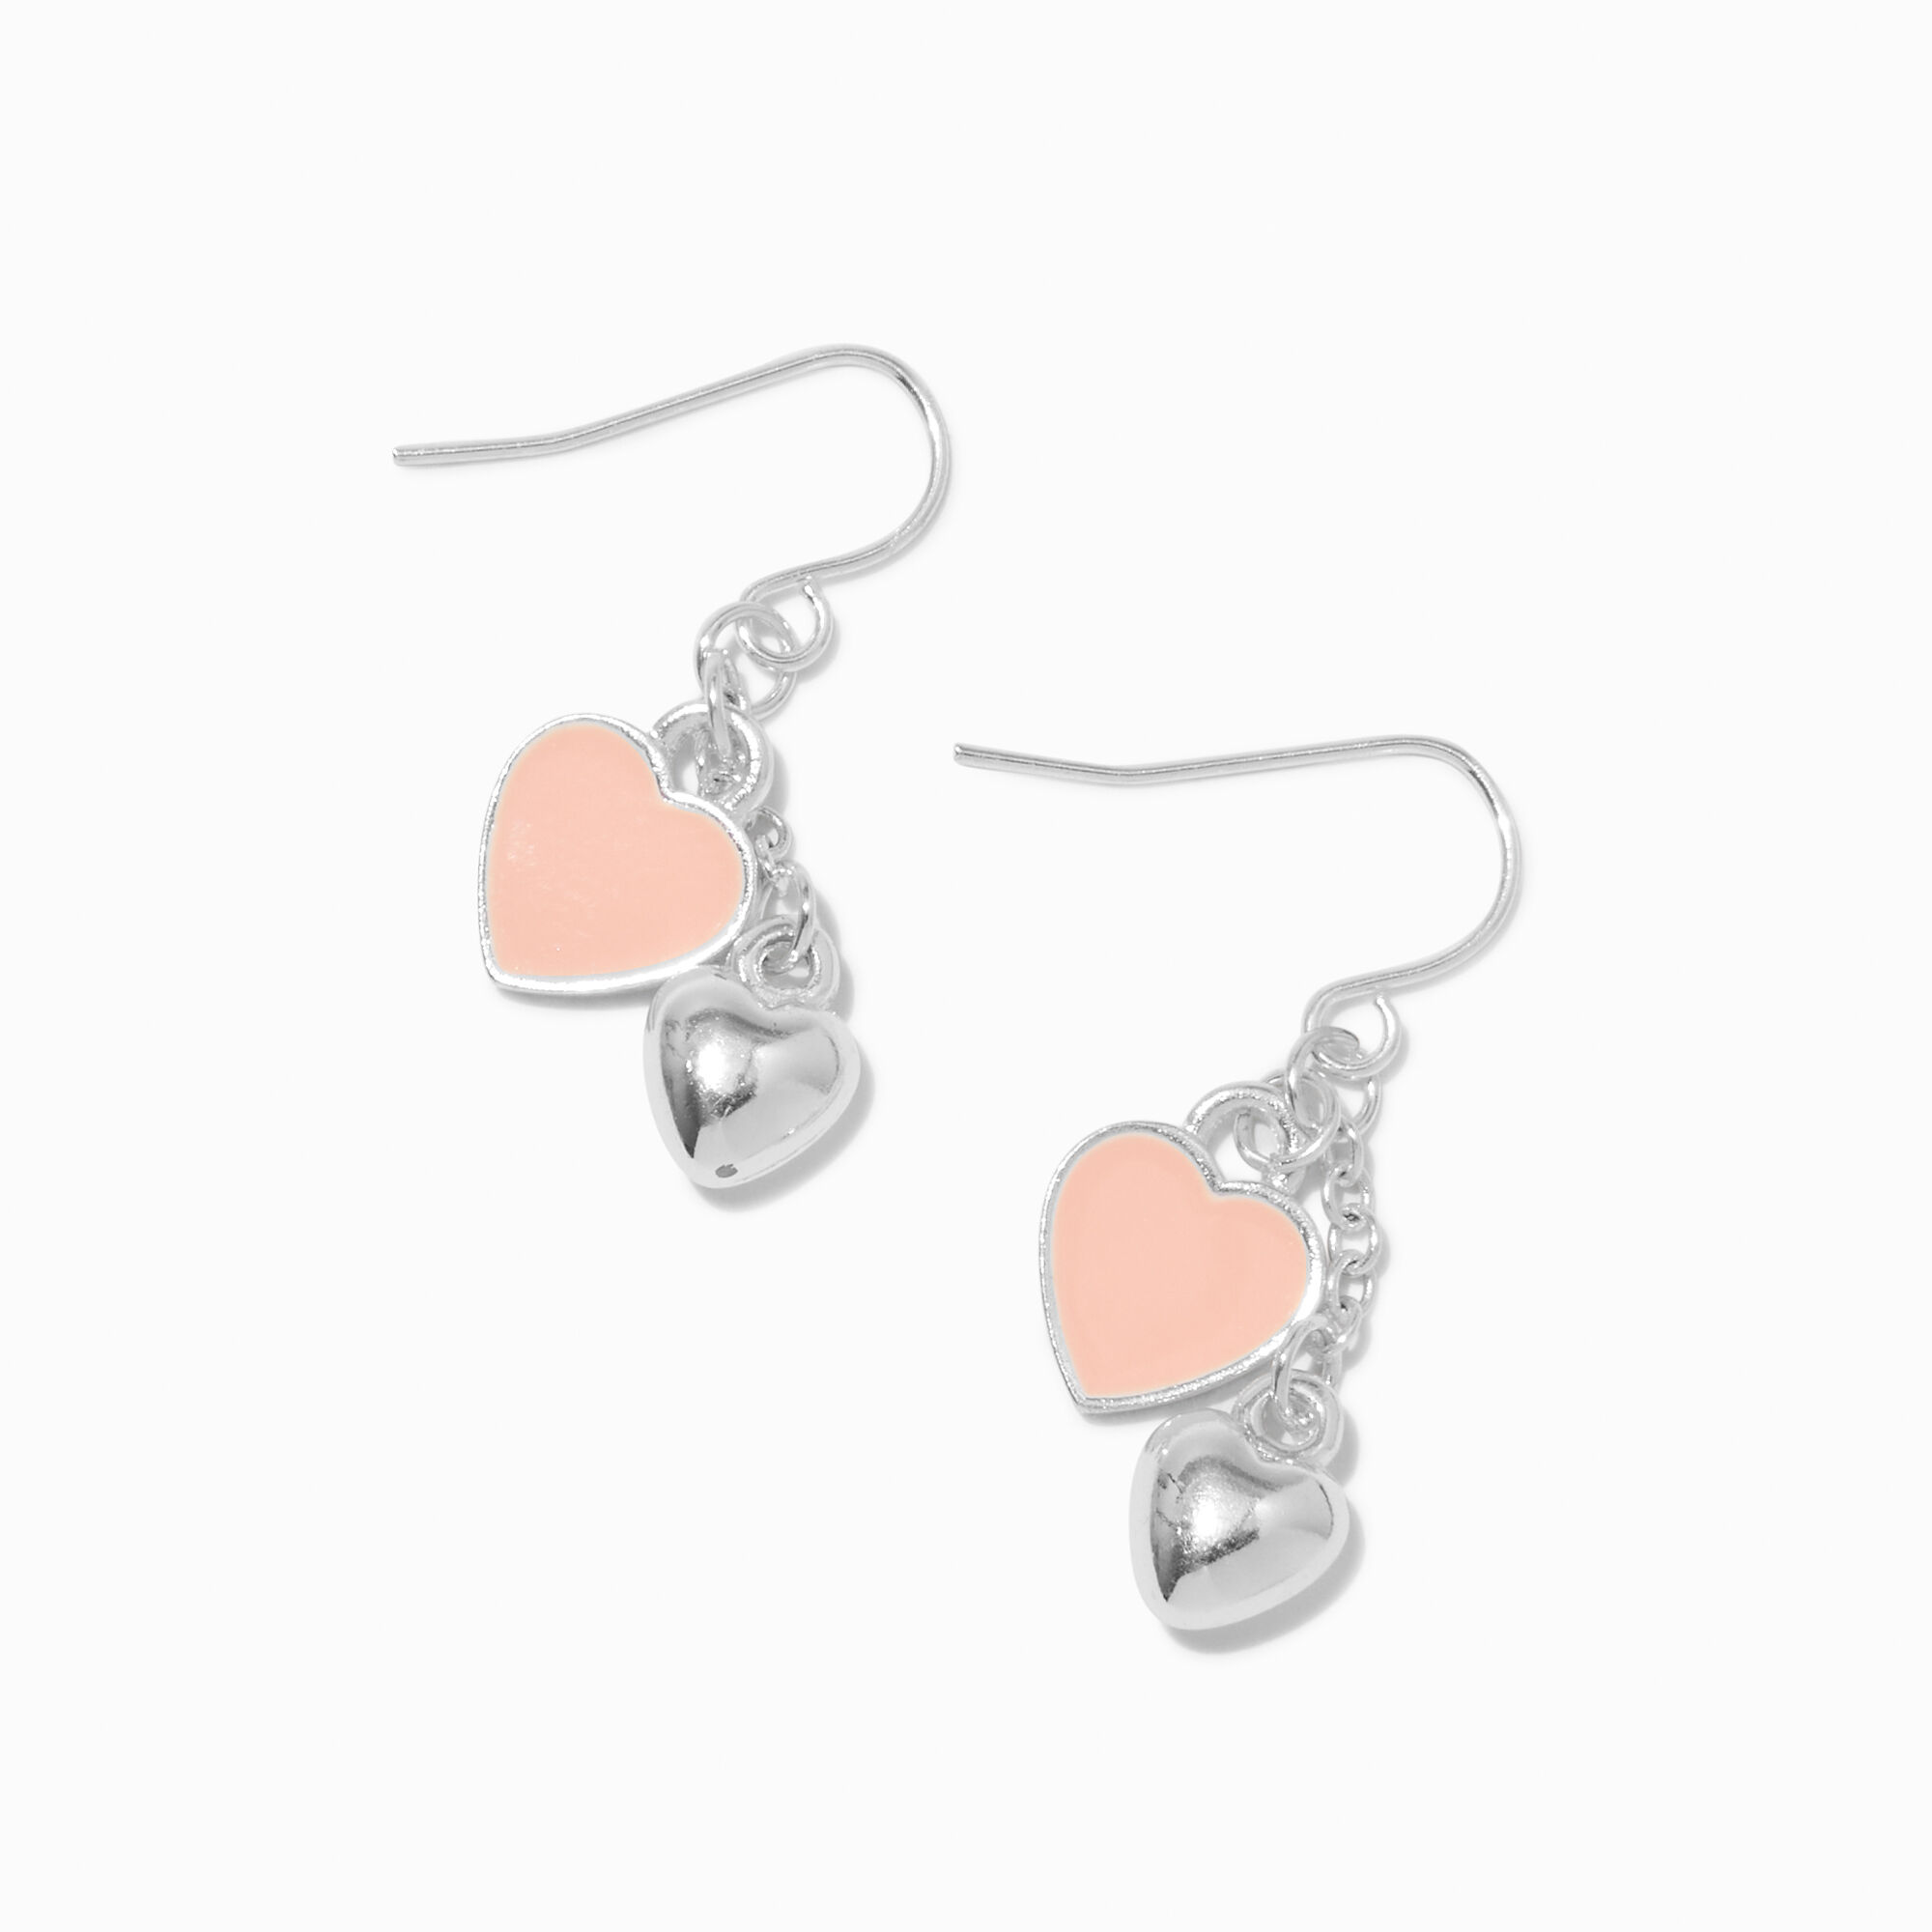 View Claires Hearts SilverTone 1 Drop Earrings Peach information